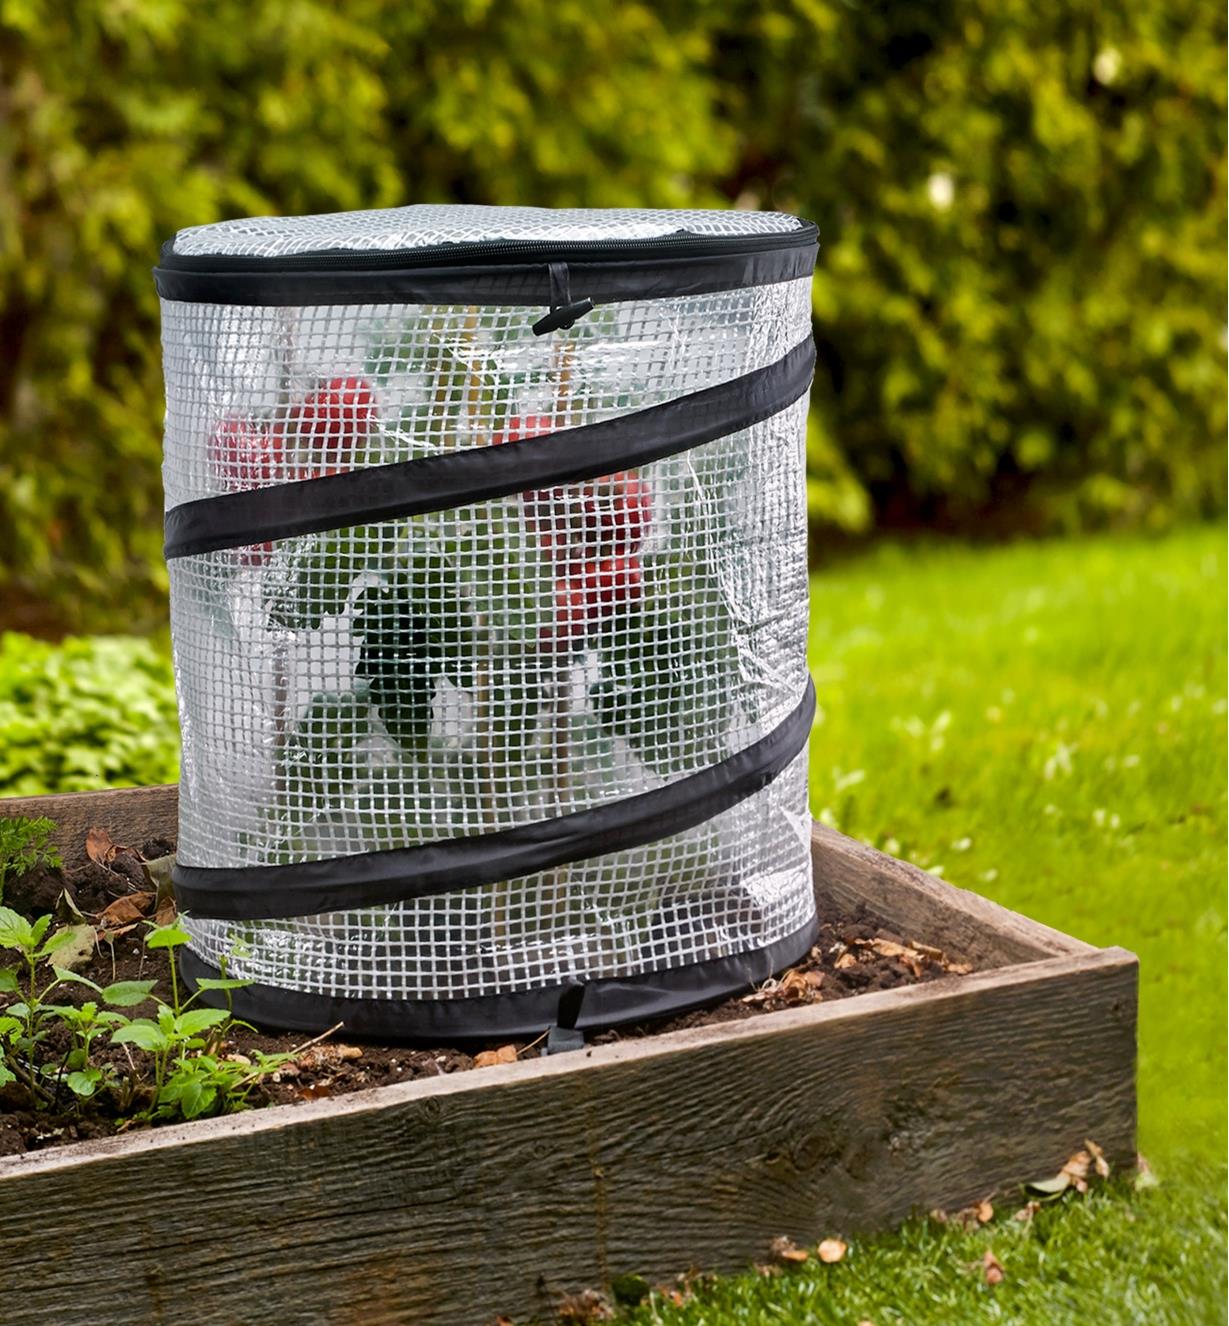 A pop-up plant cover, with the reinforced plastic top zipped on, staked in place over a tomato plant